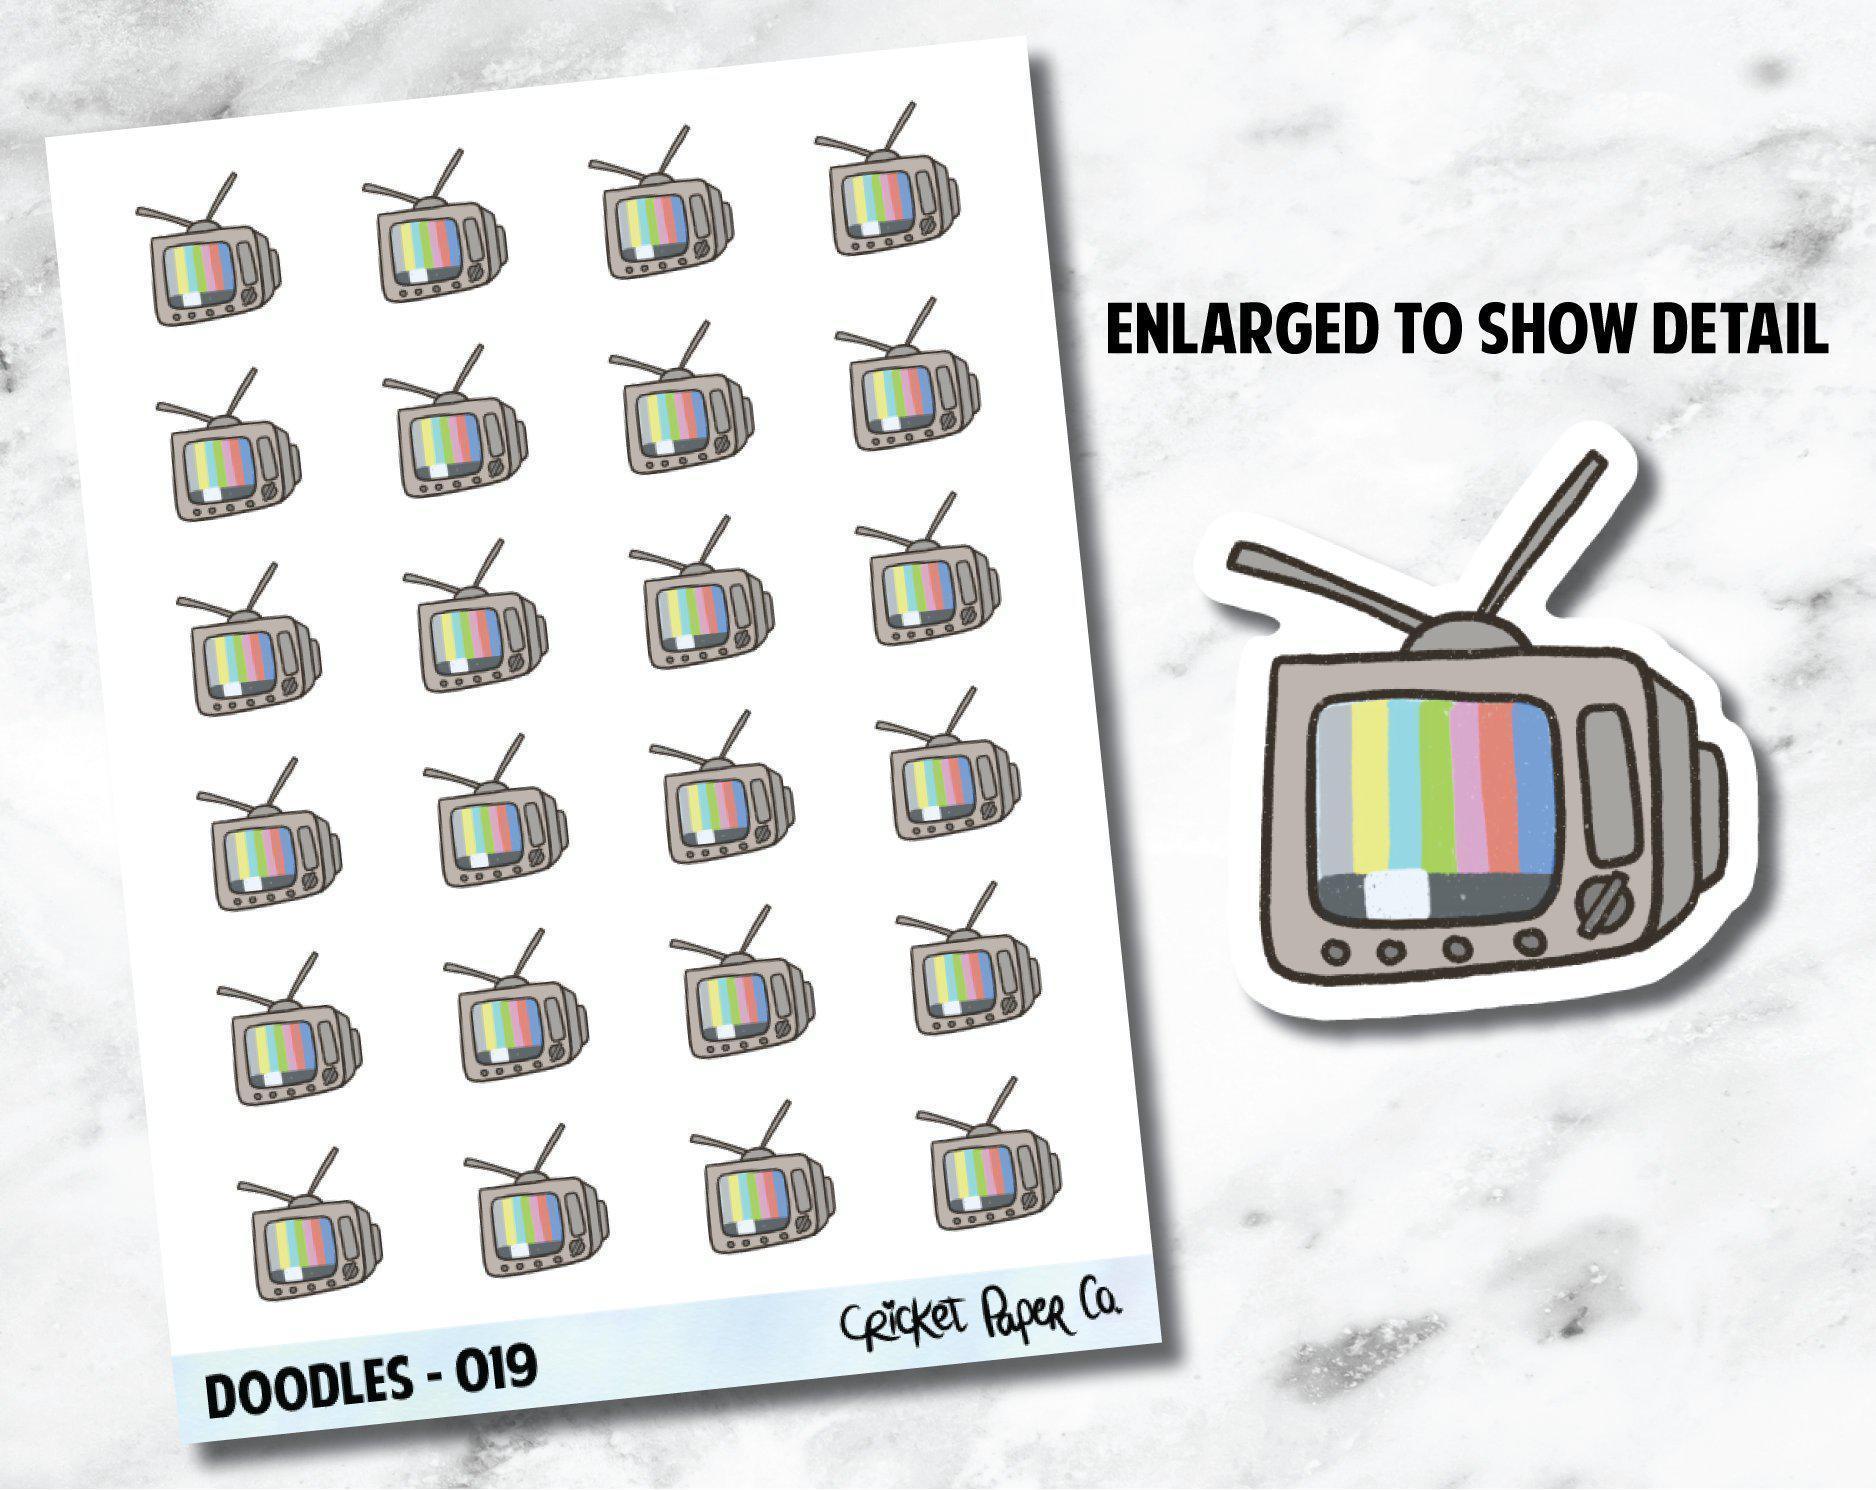 TV, Television, Cable Bill, TV Show Hand Drawn Doodles - 019